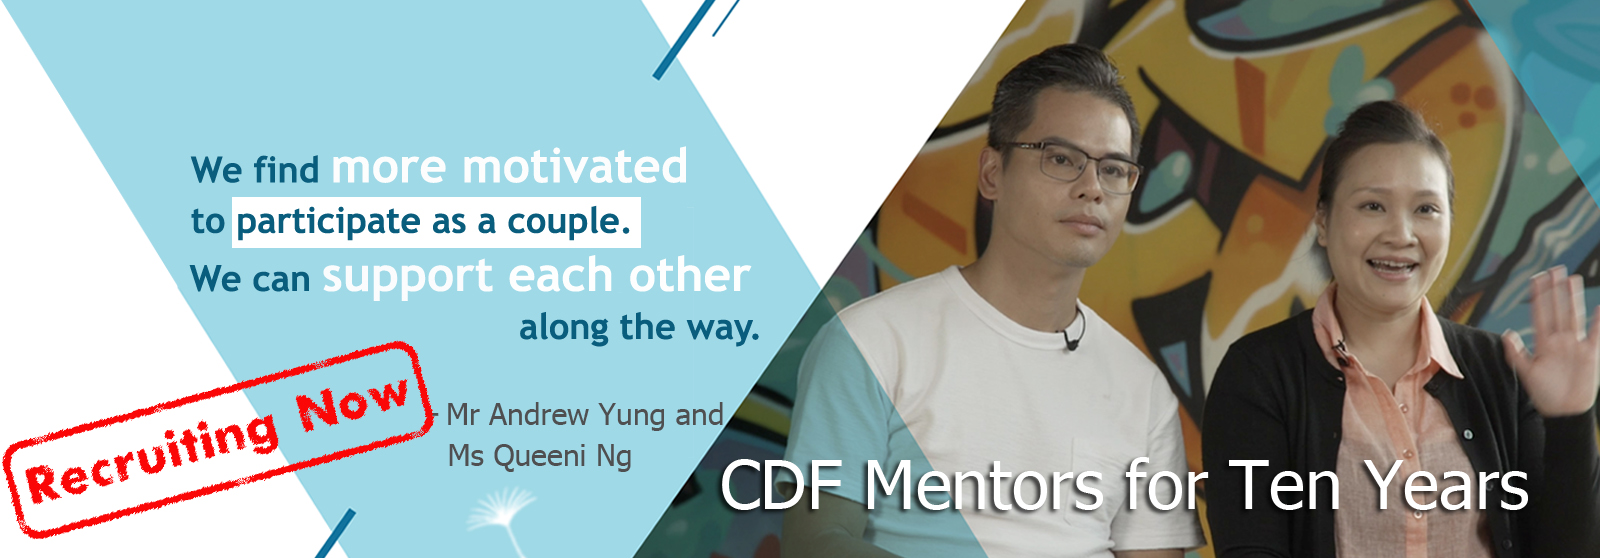 CDF Mentors for Ten Years - Mr Andrew Yung and Ms Queeni Ng